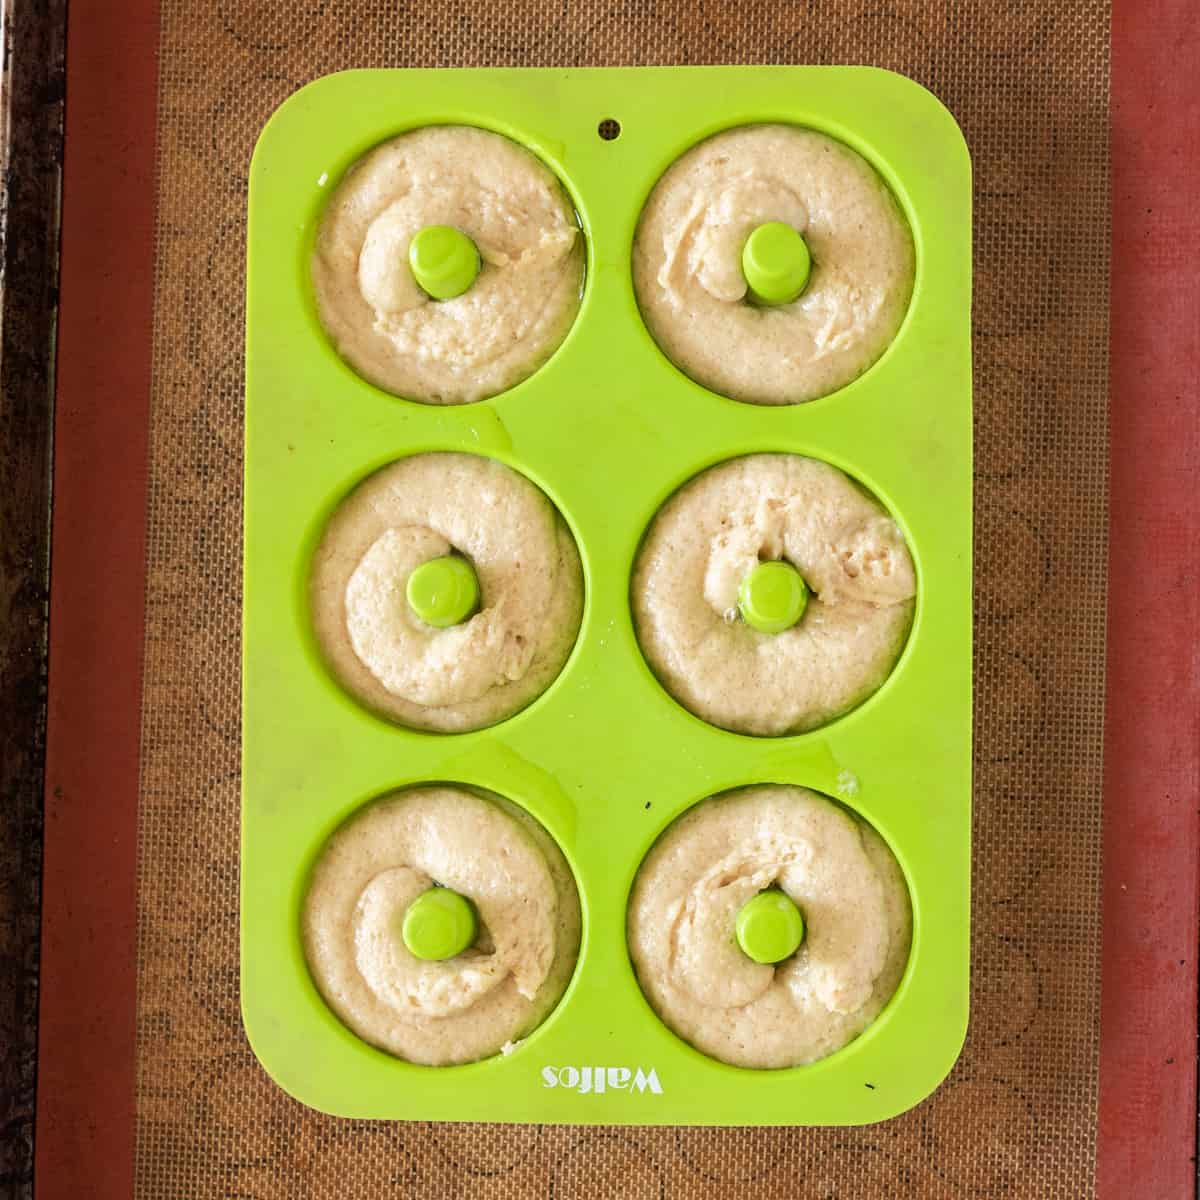 the donuts in a green donut pan before being baked.